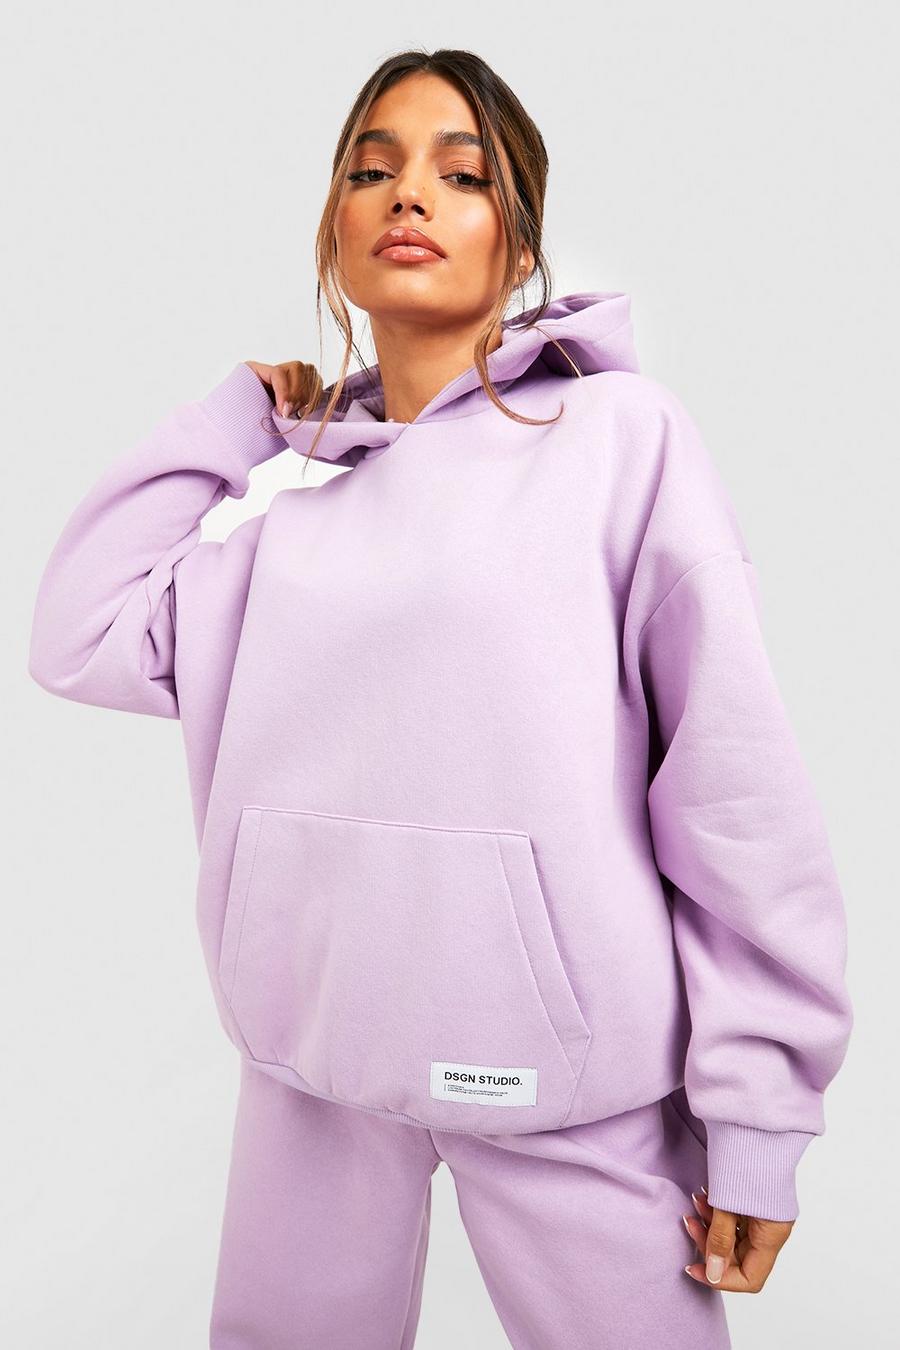 Lilac Dsgn Studio Woven Label Hooded Tracksuit